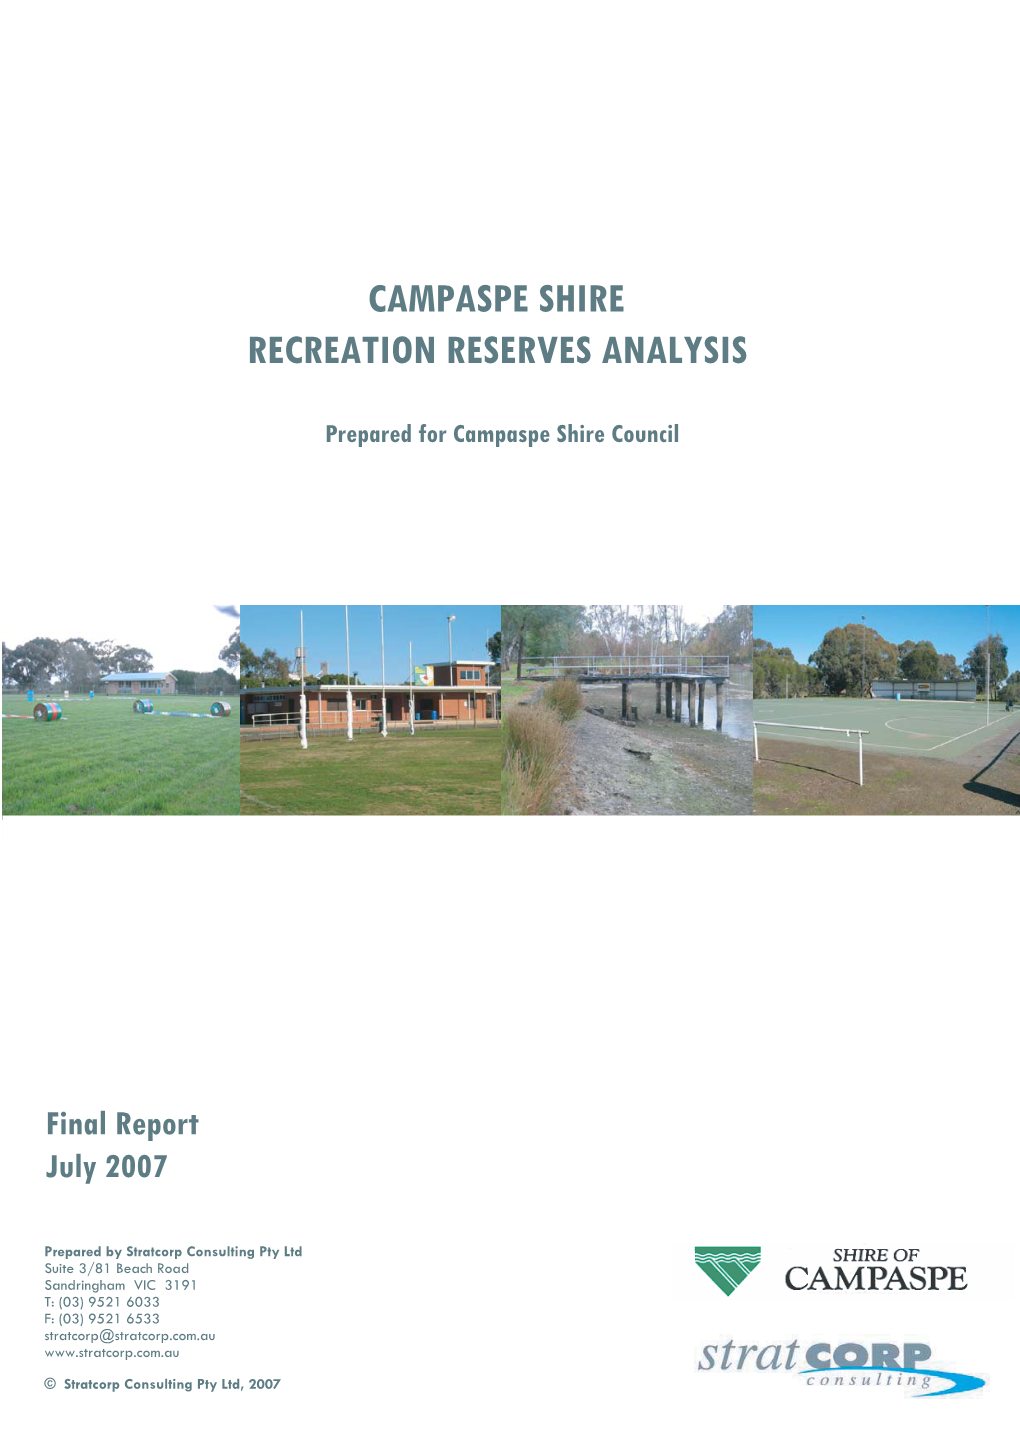 Campaspe Shire Recreation Reserves Analysis